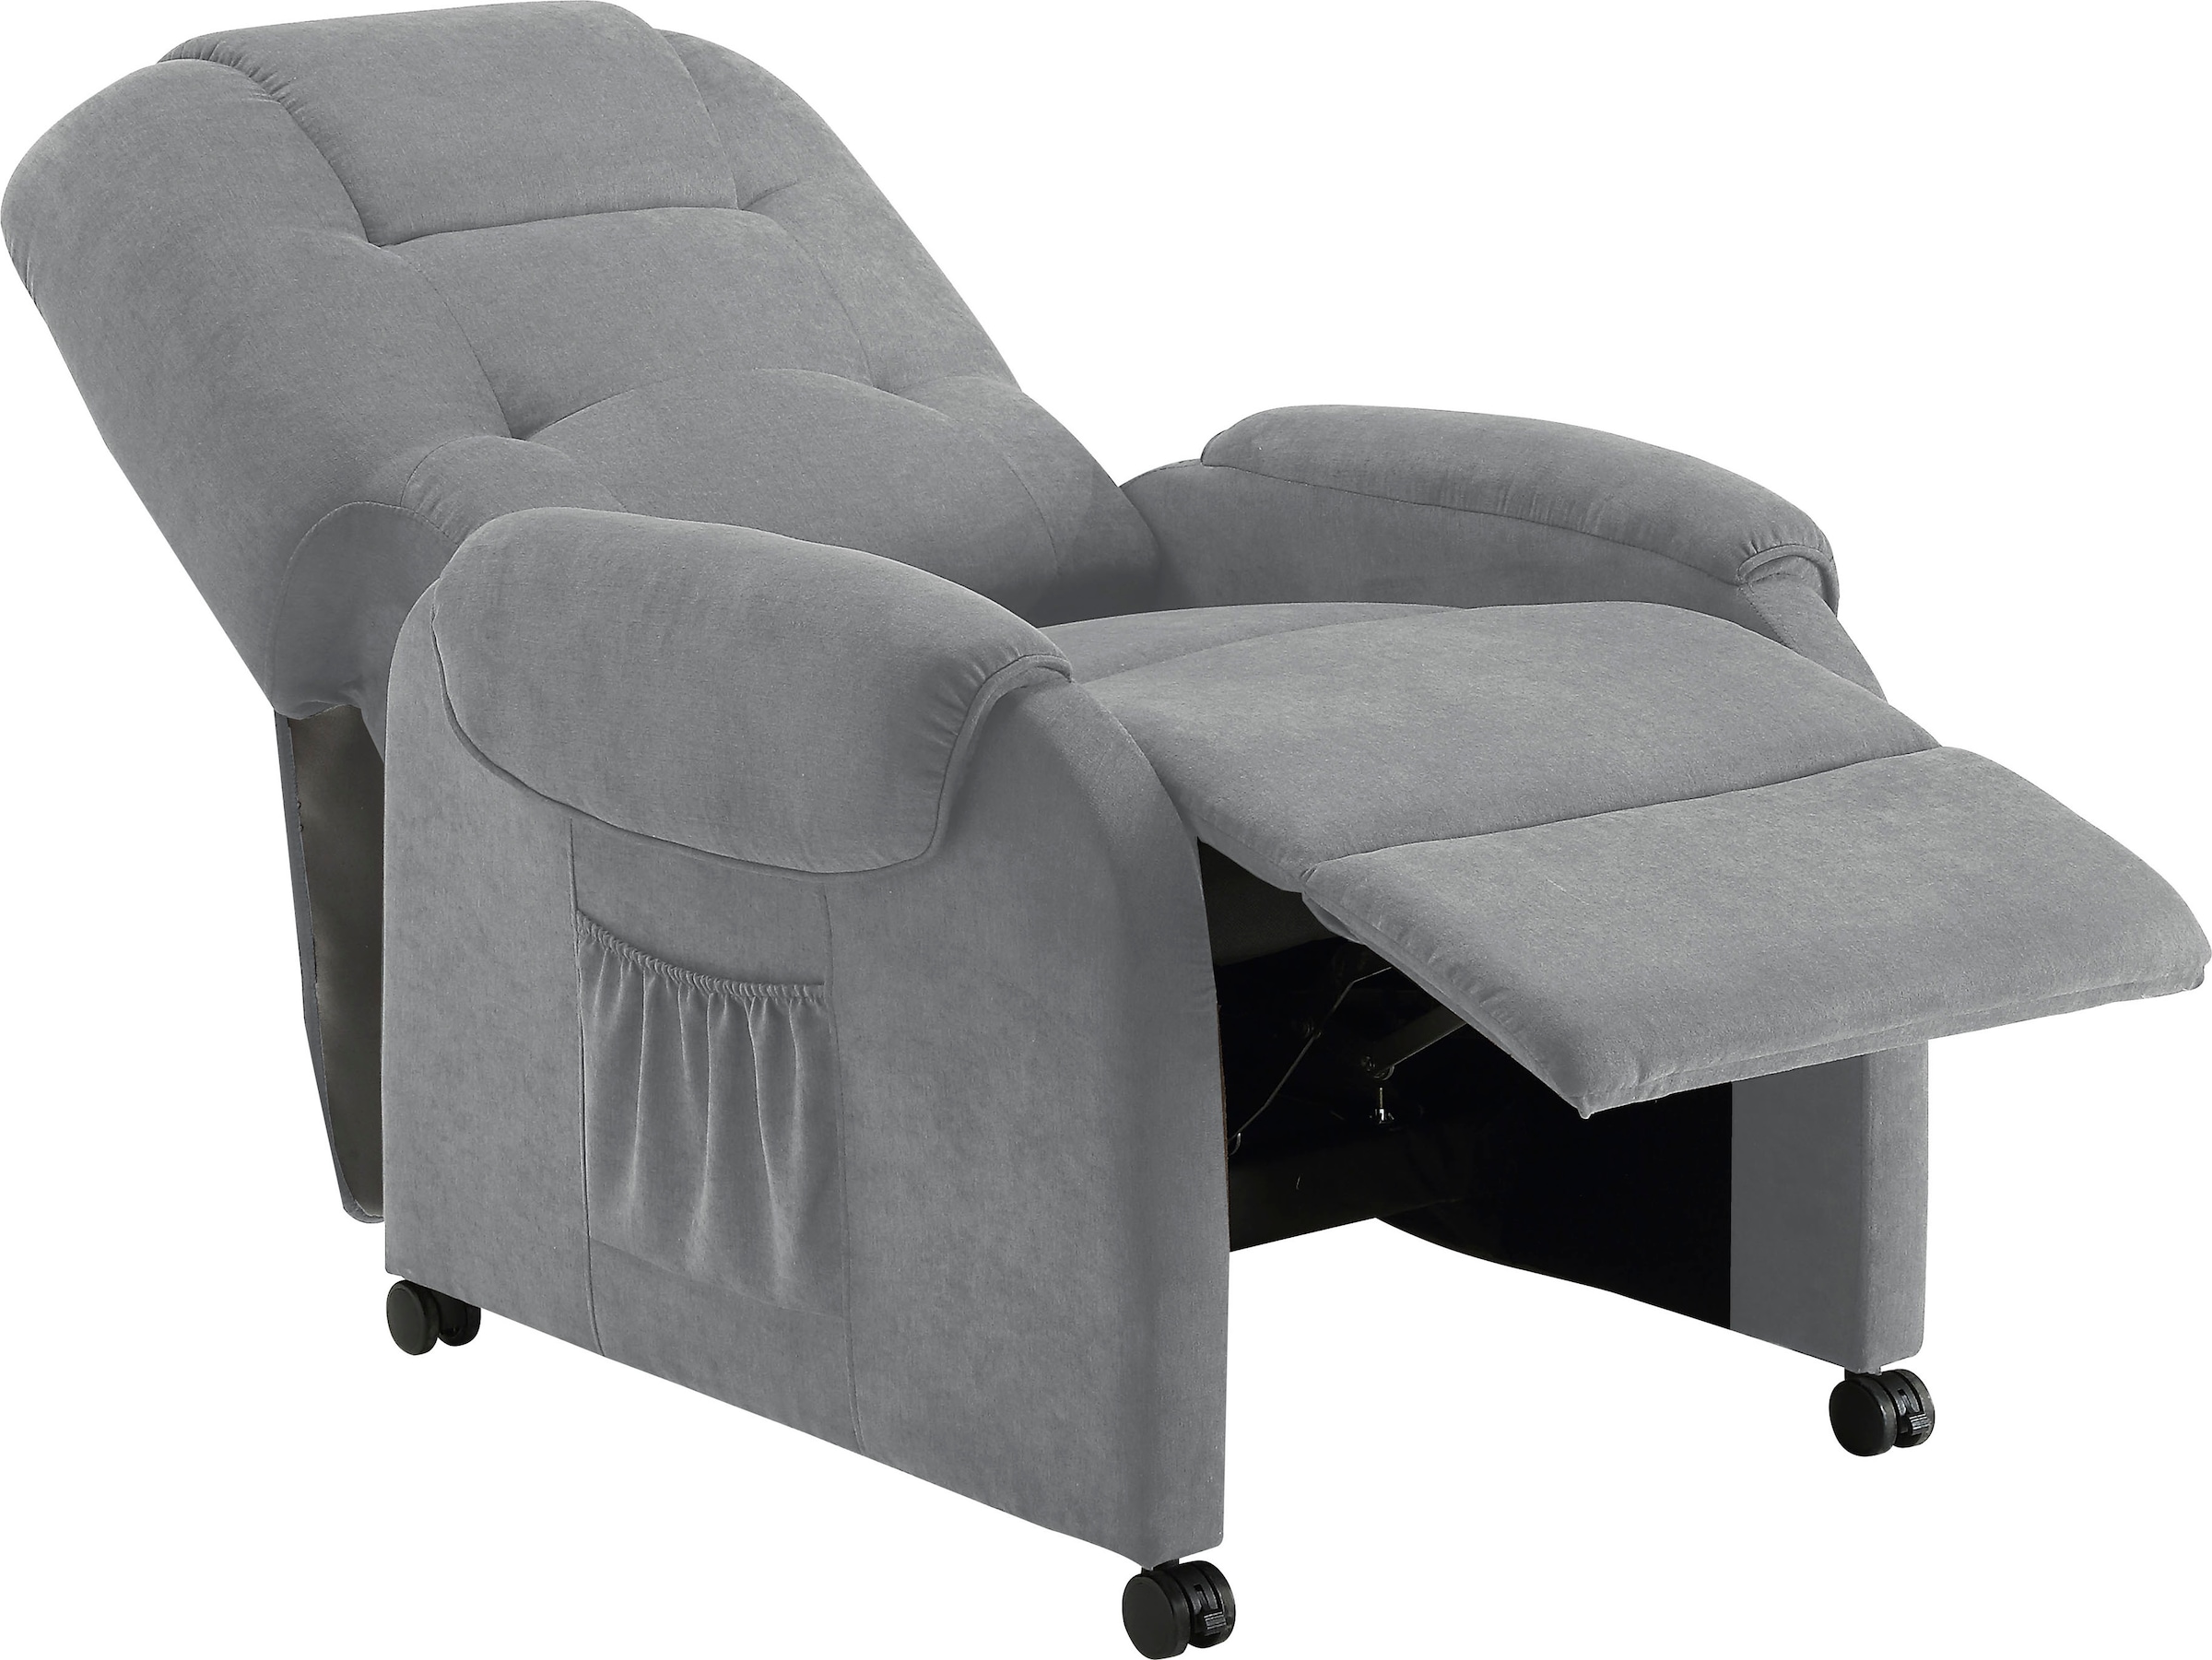 Shop Relaxfunktion ATLANTIC inklusive Federkern Online OTTO und home Relaxsessel collection »Tobi«,